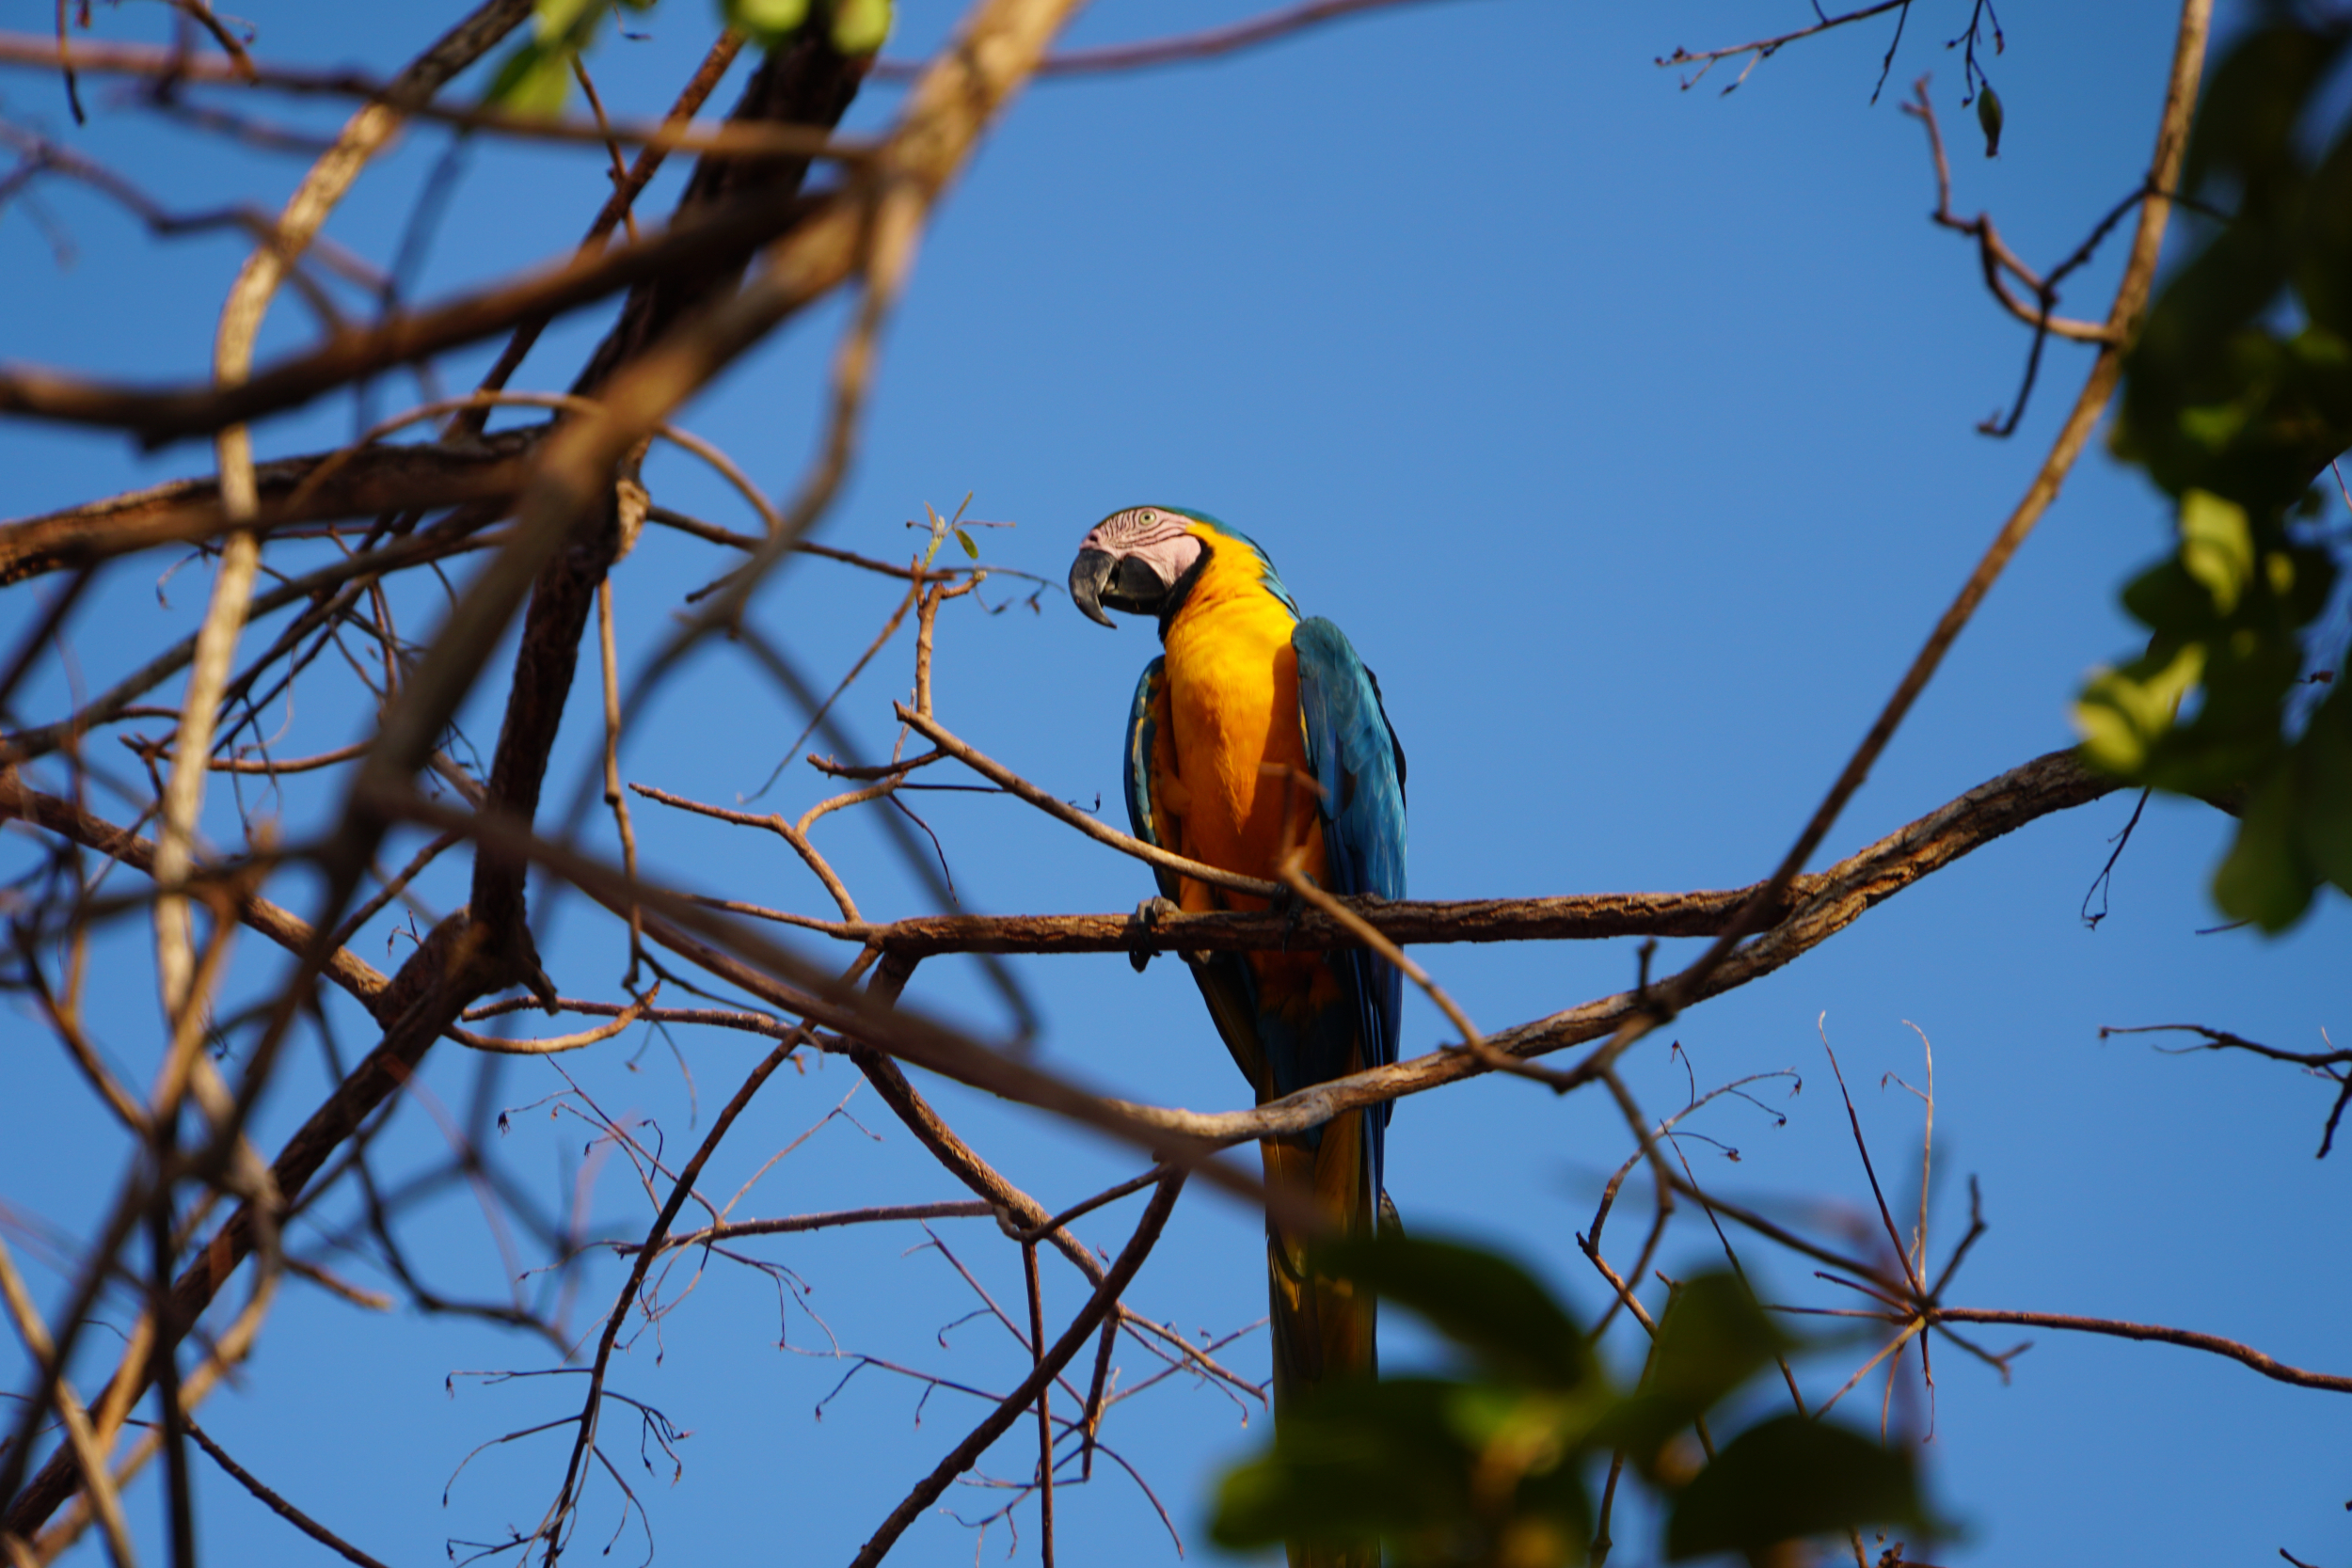 51. Blue and yellow Macaw